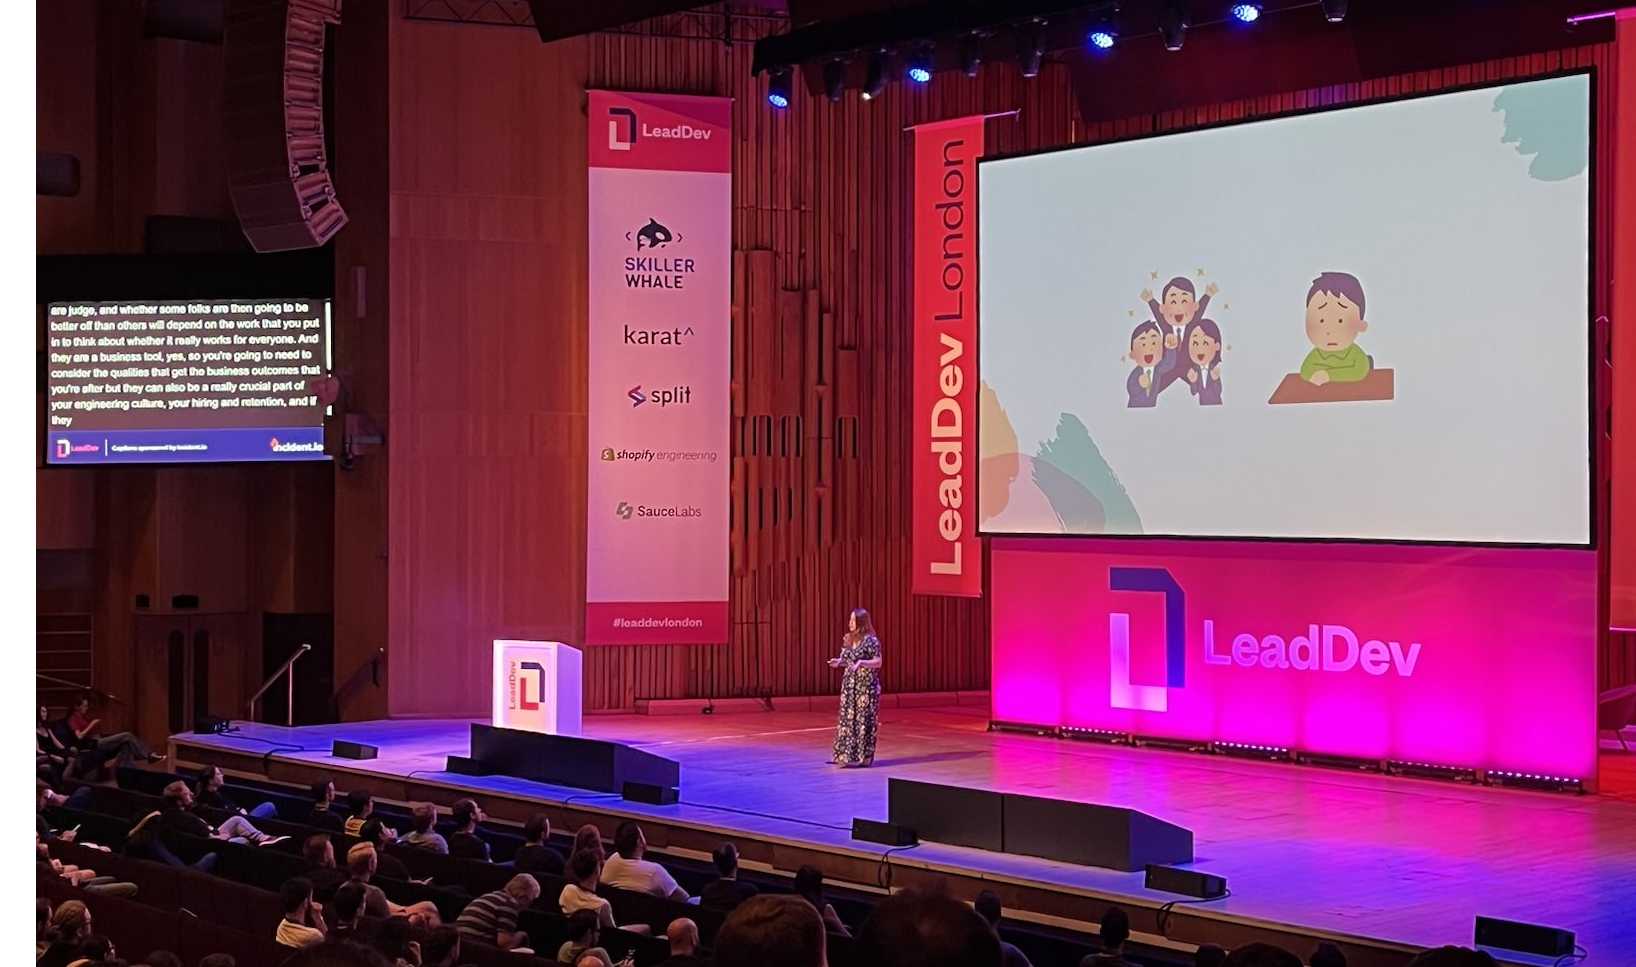 A view of me on the Lead Dev stage at the Barbican. I'm wearing a long floral dress, and am on a huge stage in front of slides with illustrations of happy and sad people on. There's lots of red and pink and Lead Dev banners around. 